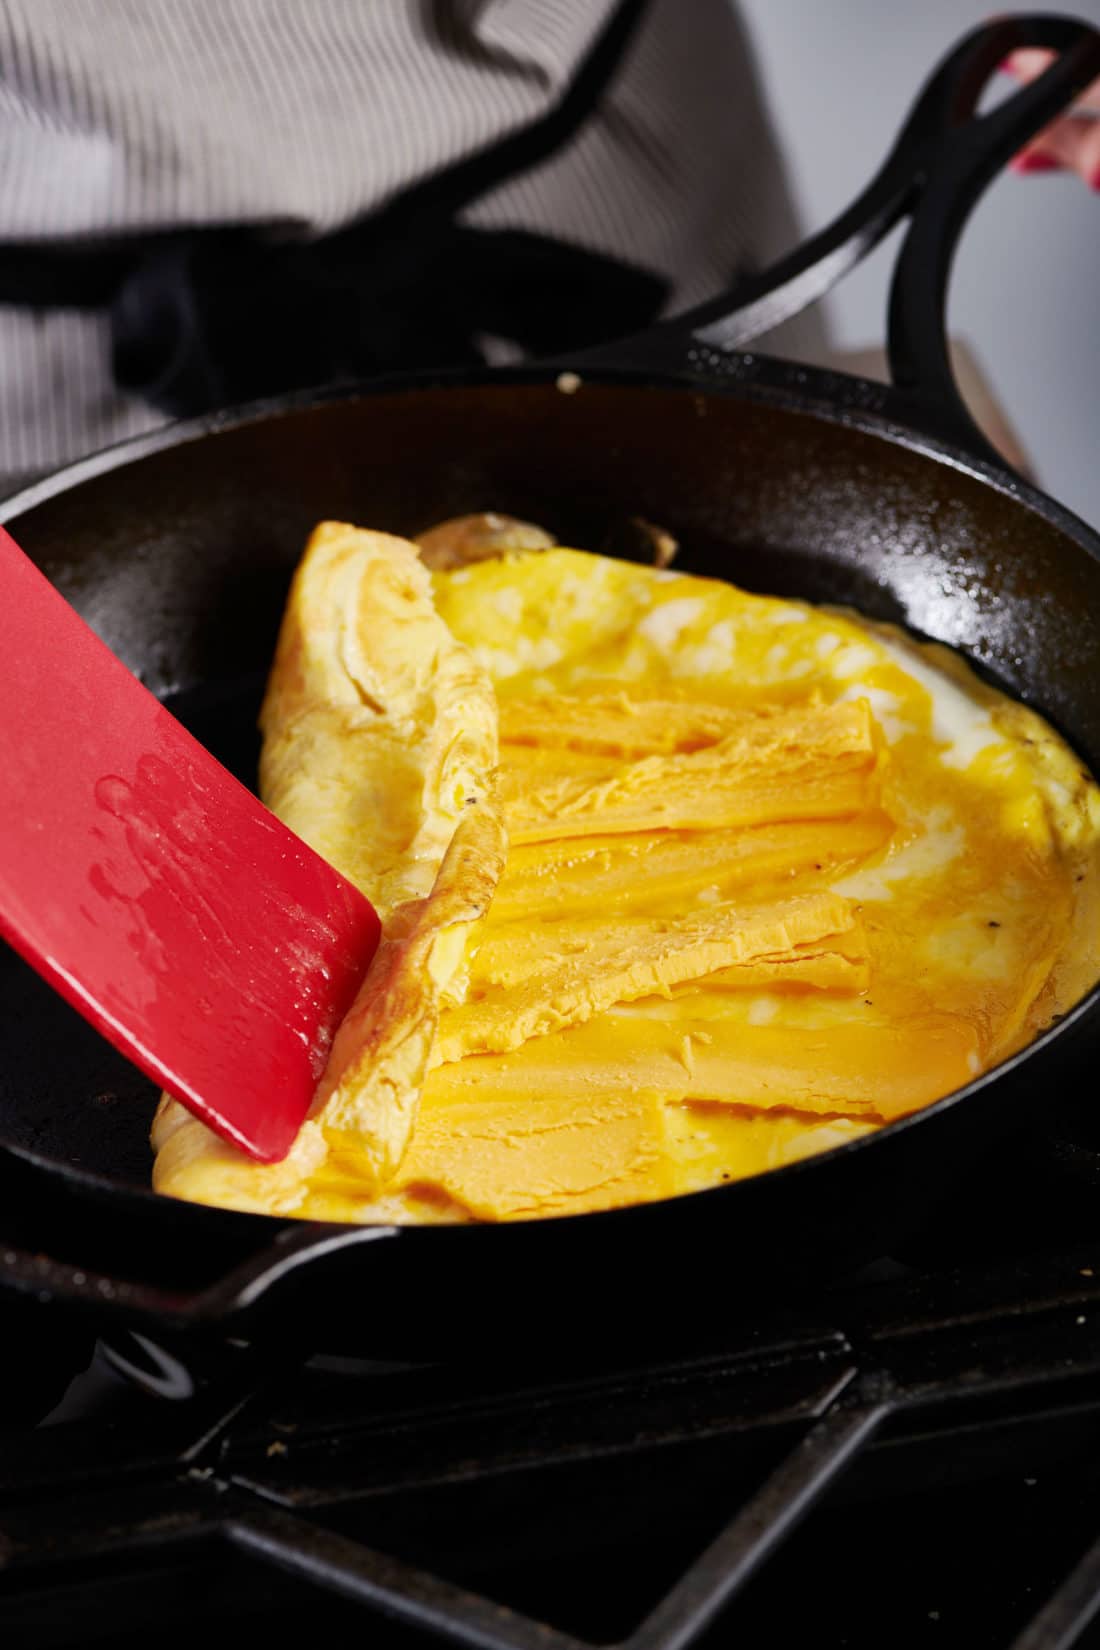 Red spatula folding cooked egg over cheese in a skillet.